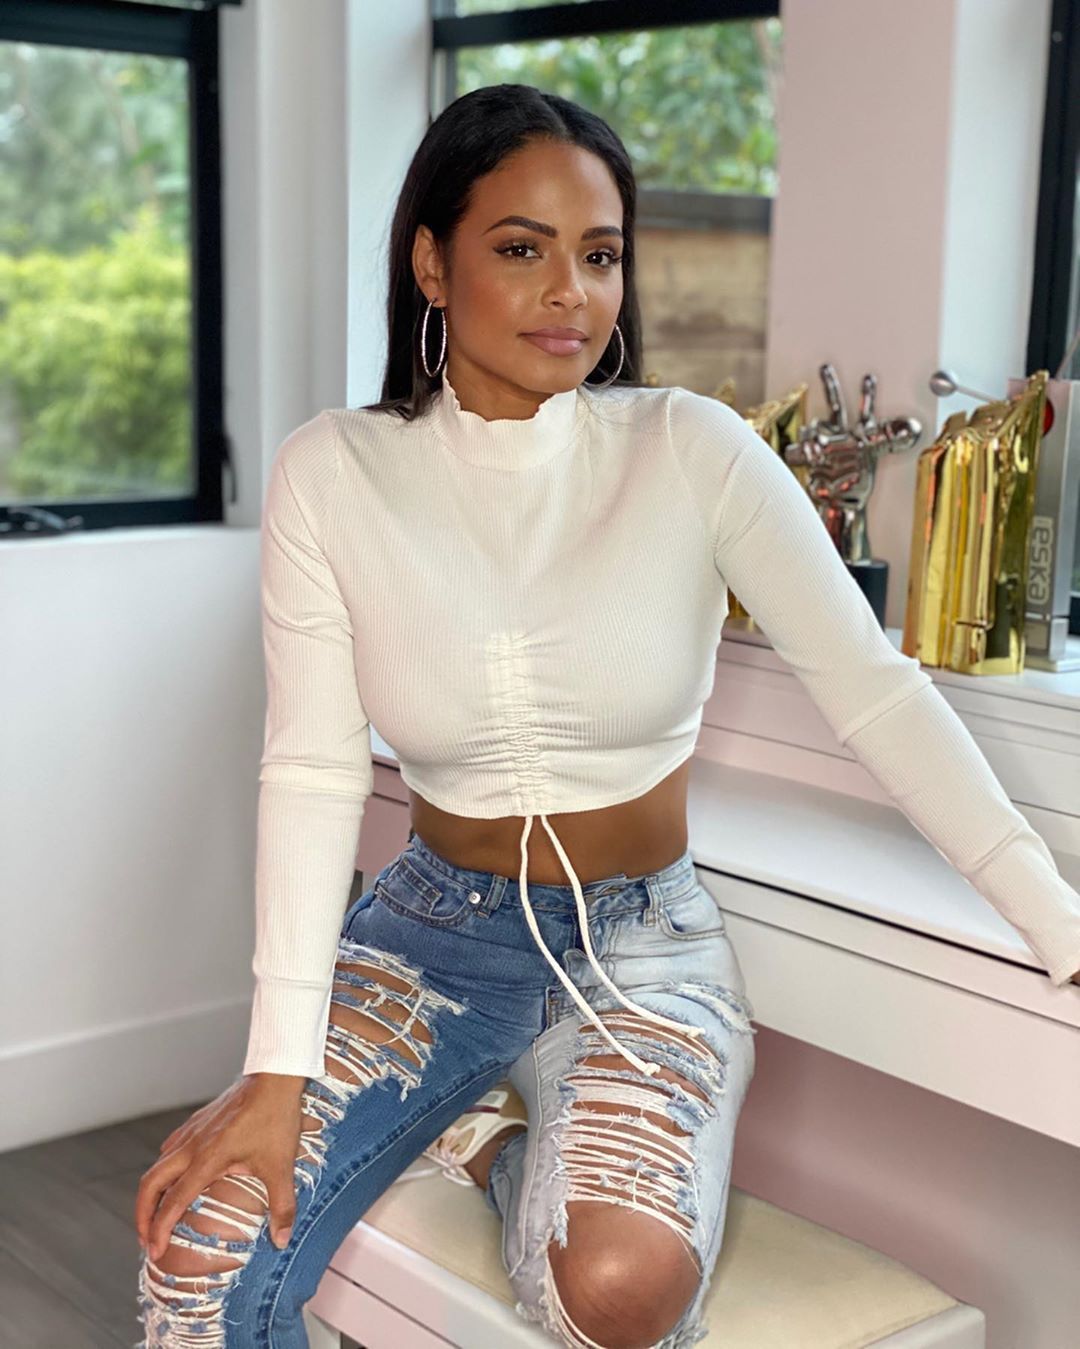 Christina Milian Cooks In Her Bra For Mouth Watering Kitchen Shots